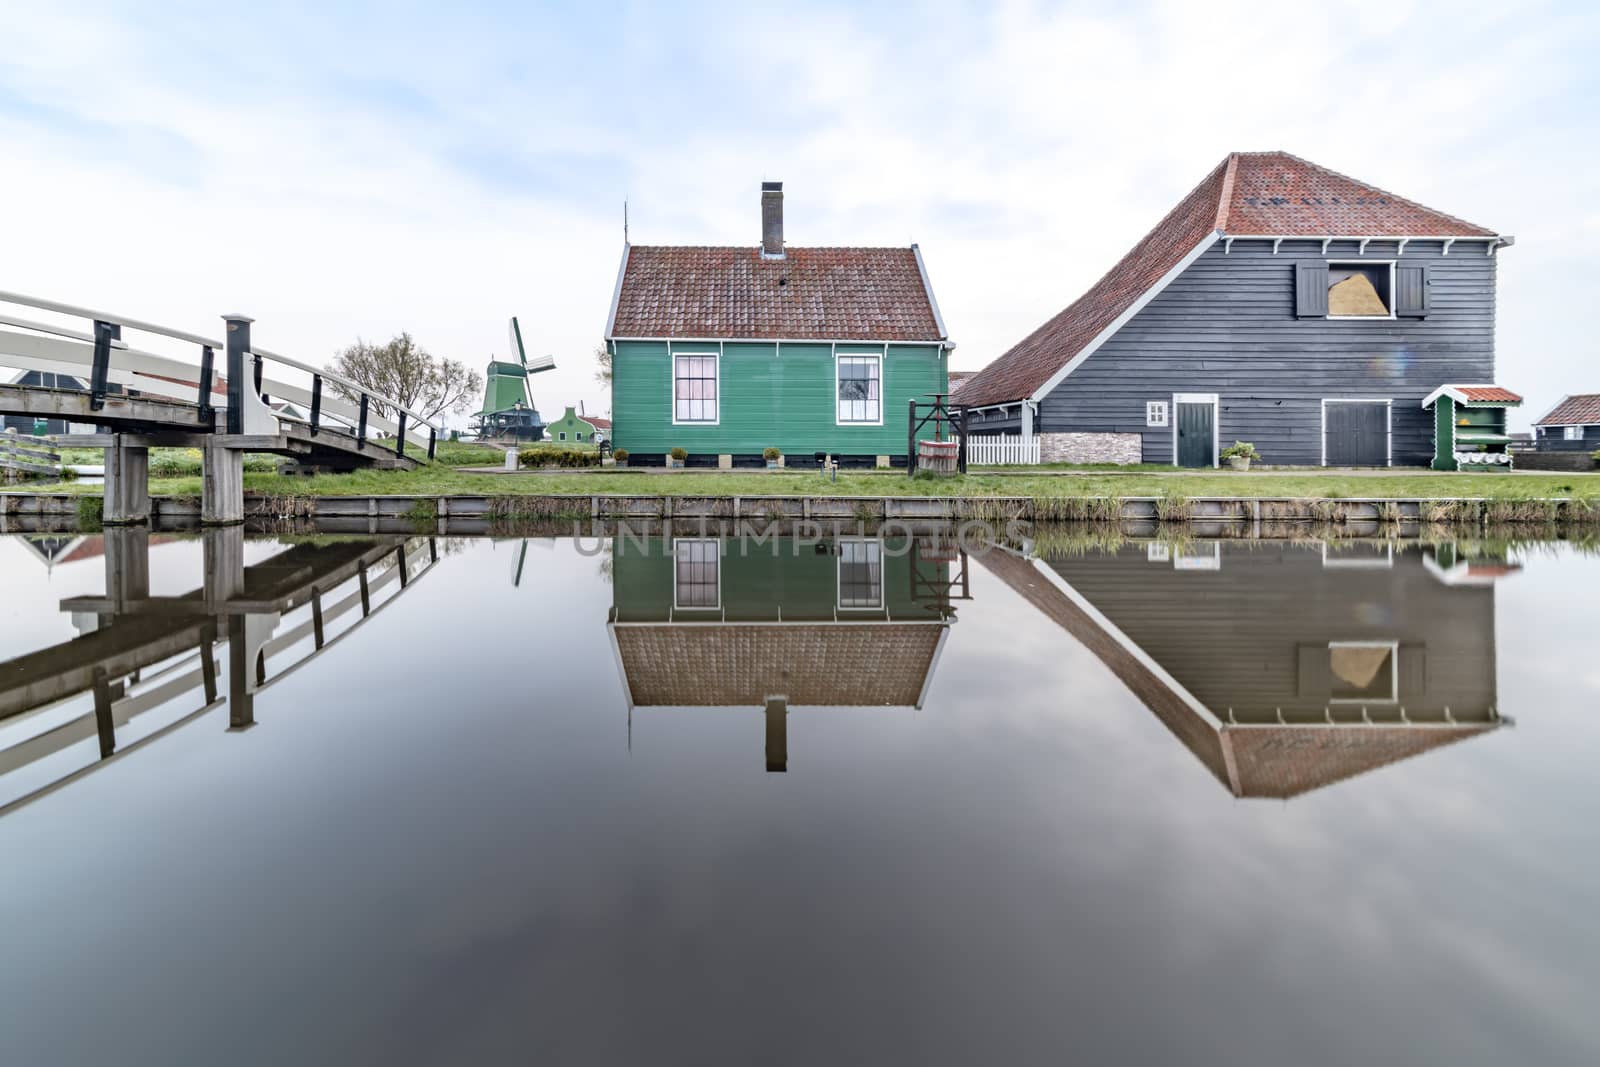 Long exposure of a reflection of the wooden green houses topped with dark orange color roof reflected on the calm water of the canal by ankorlight